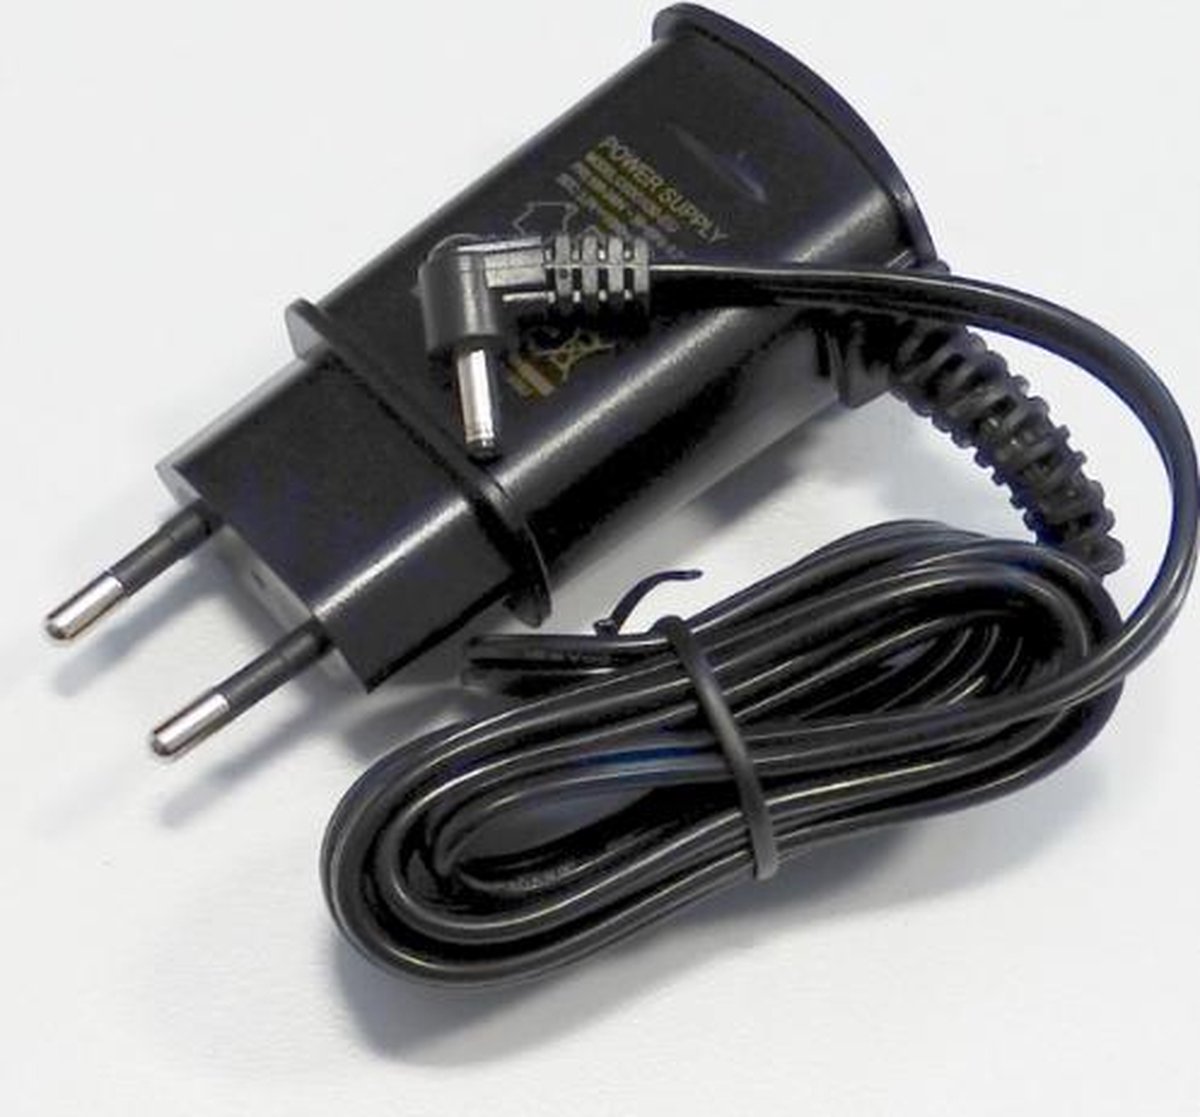 Adapter oplader lader haartrimmer tondeuse voor model T820E, T830E, T840E  Babyliss 14930 | bol.com